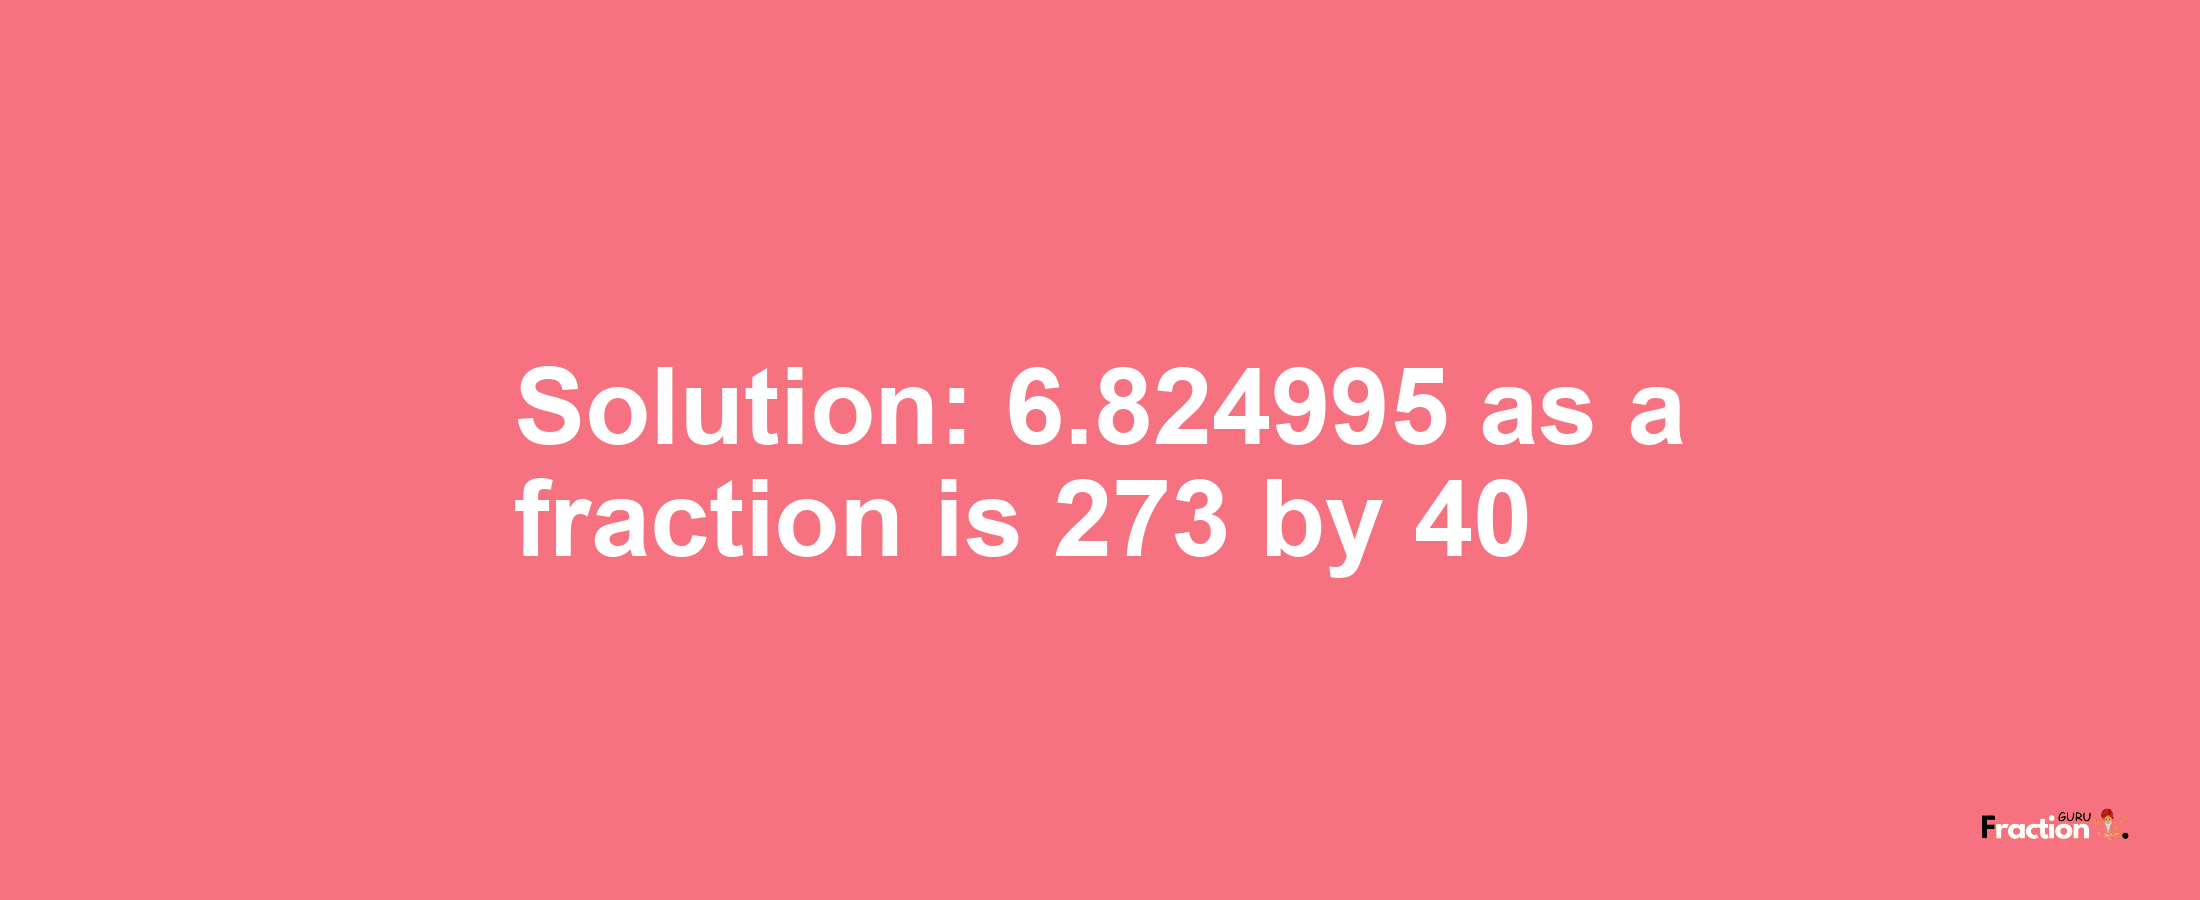 Solution:6.824995 as a fraction is 273/40